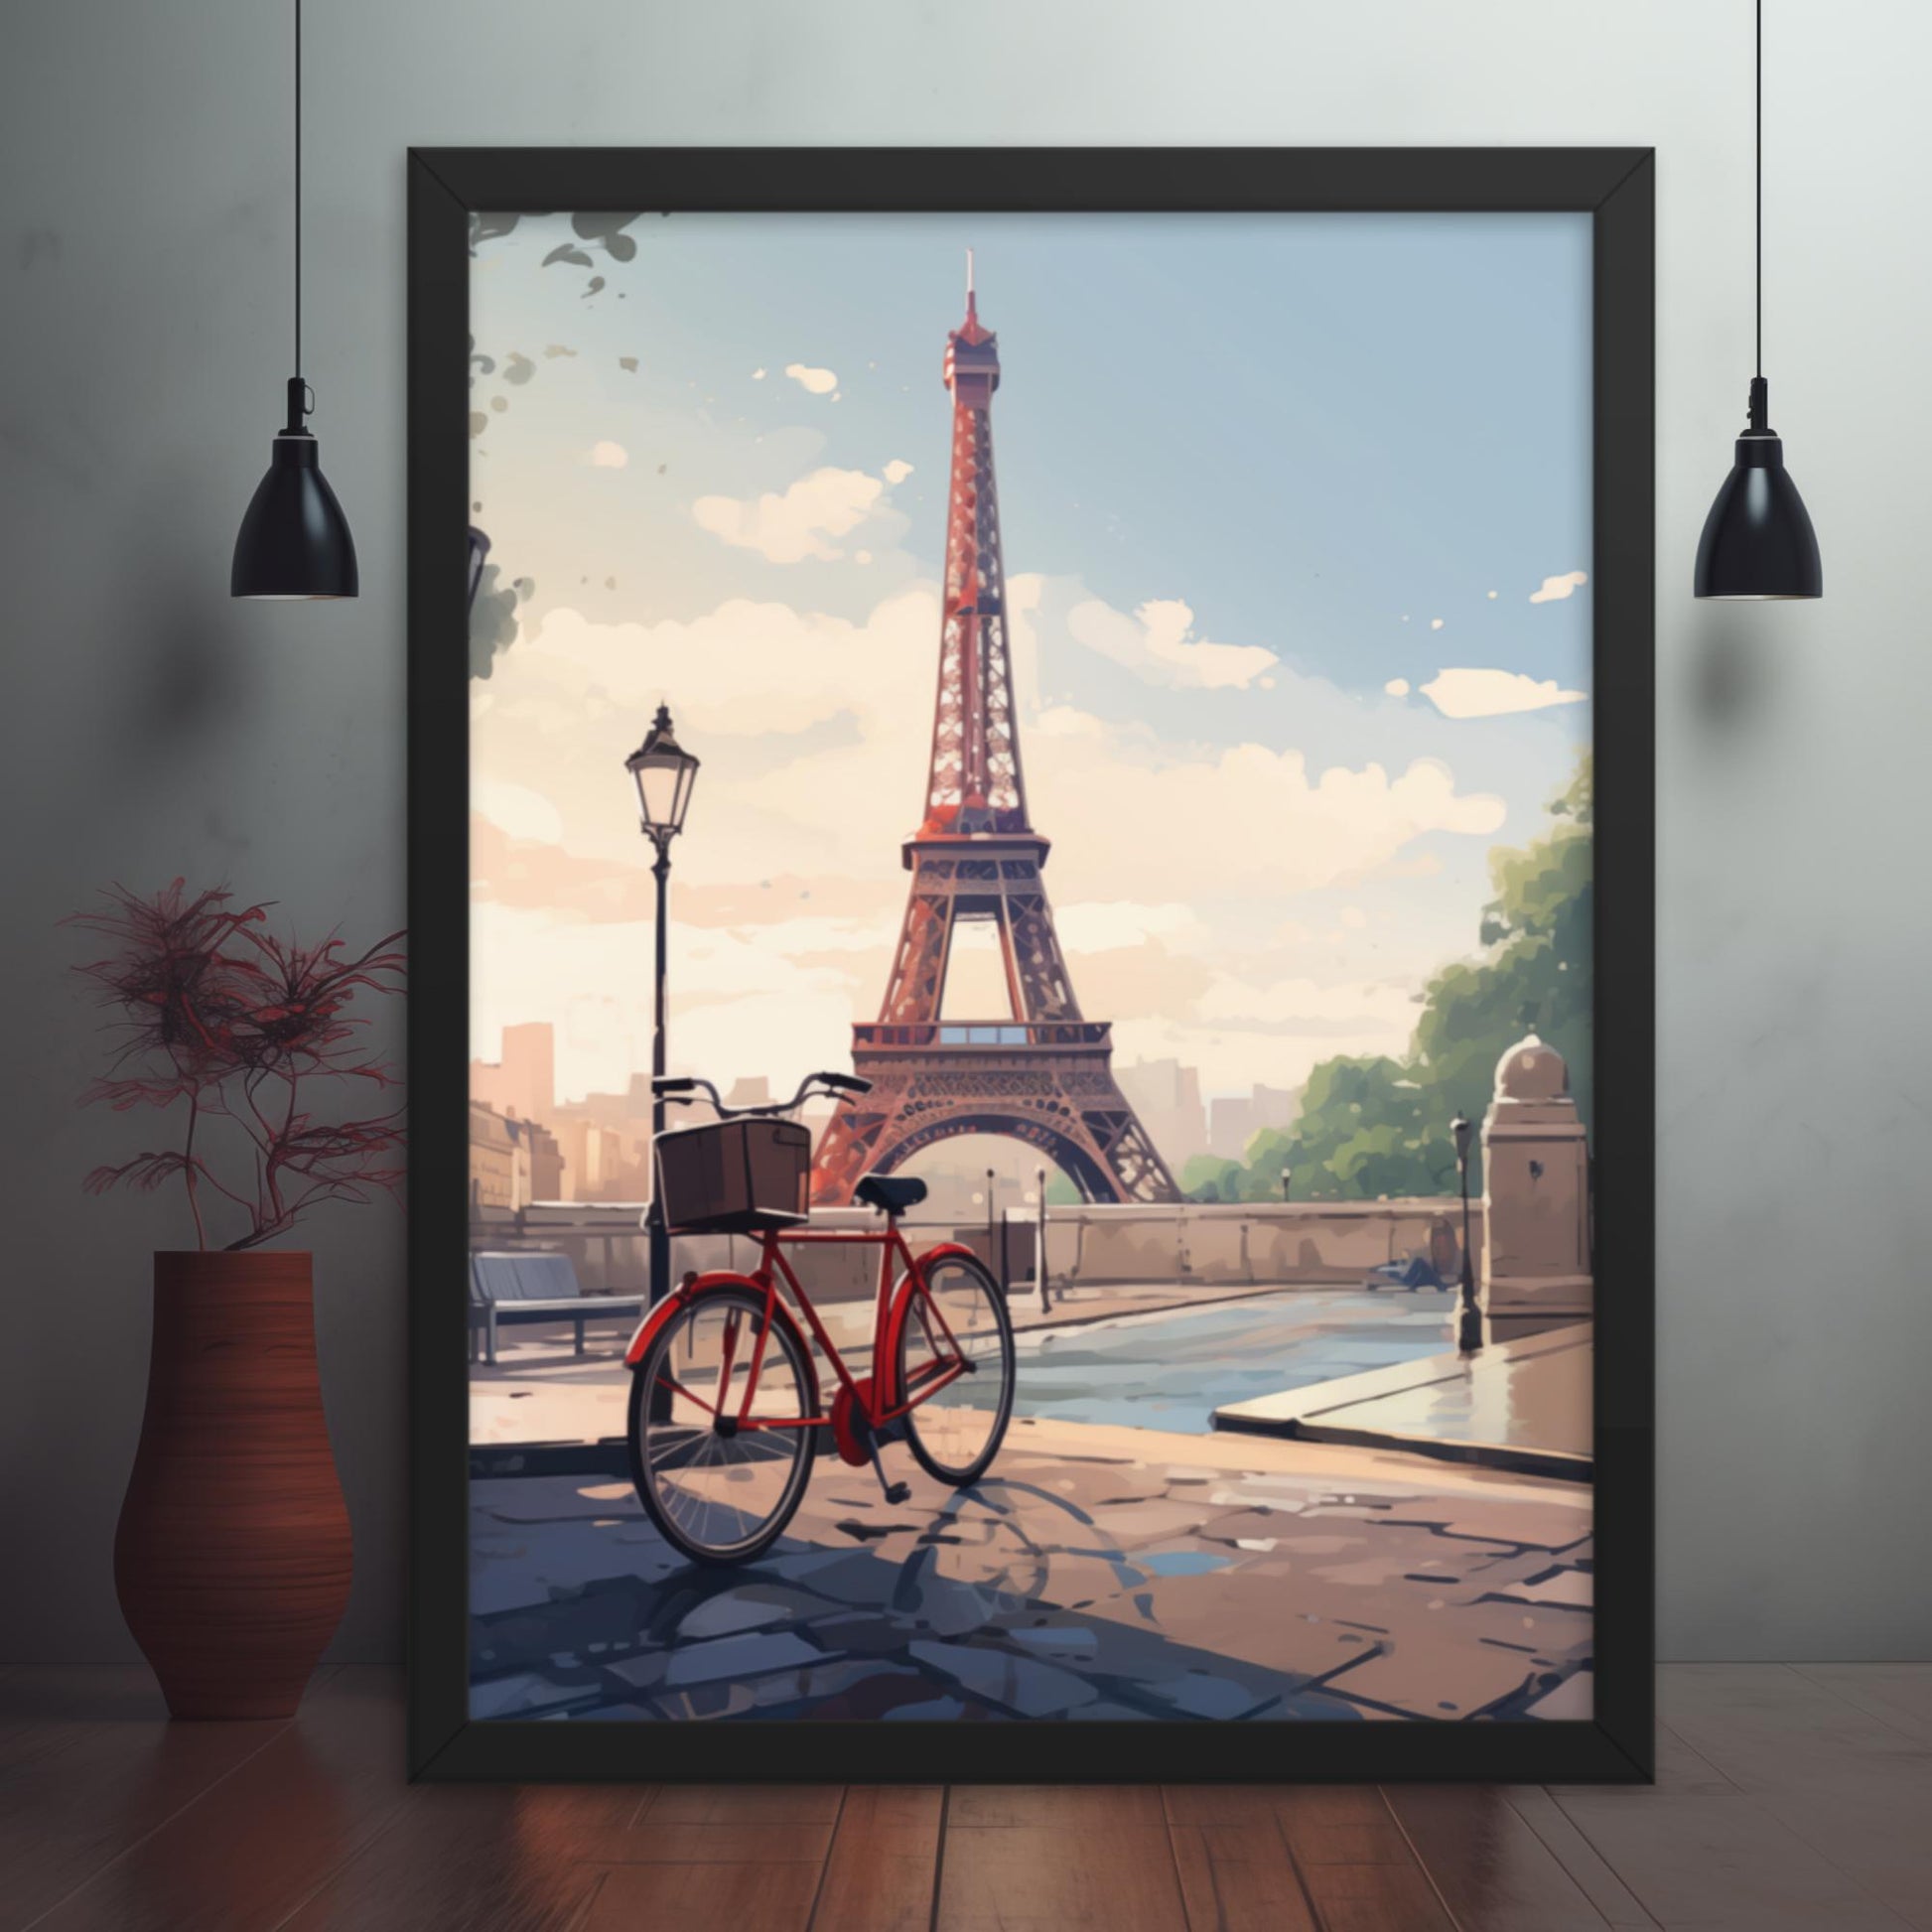 Parisian Serenity - A Gentle Pause Beneath the Eiffel Tower Framed Poster